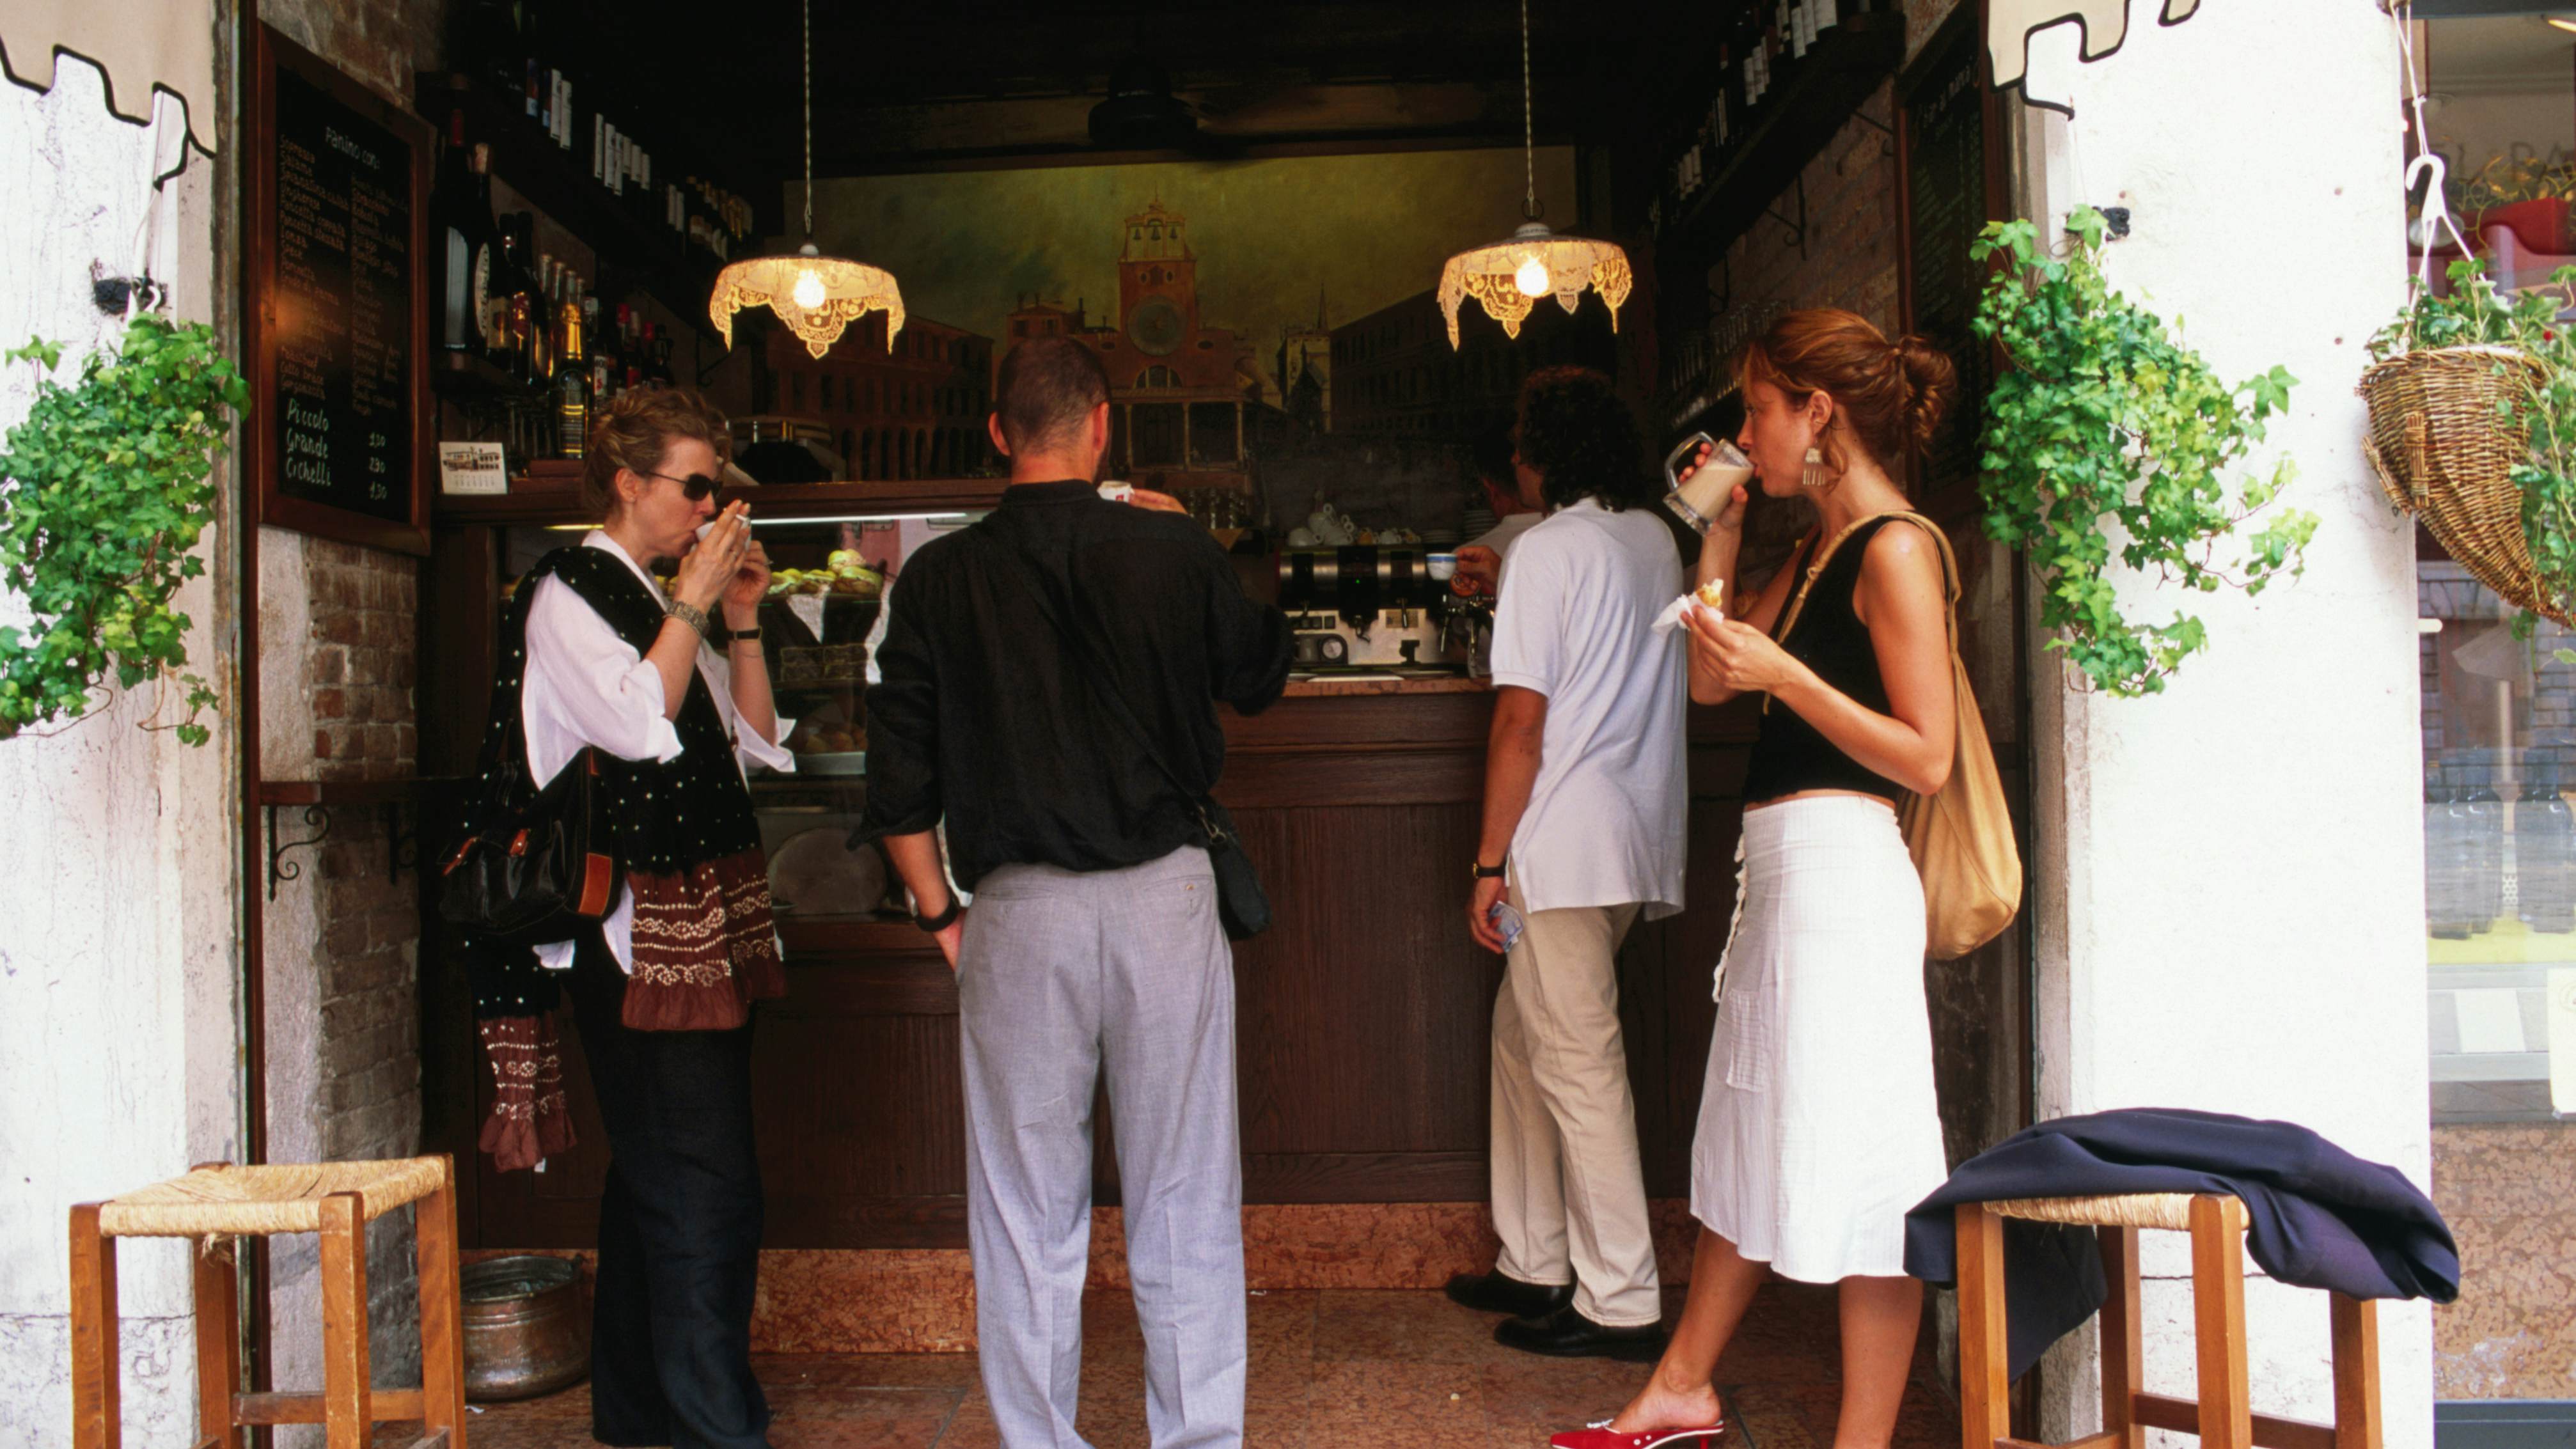 Locals take a standing coffee at Al Marca cafe.